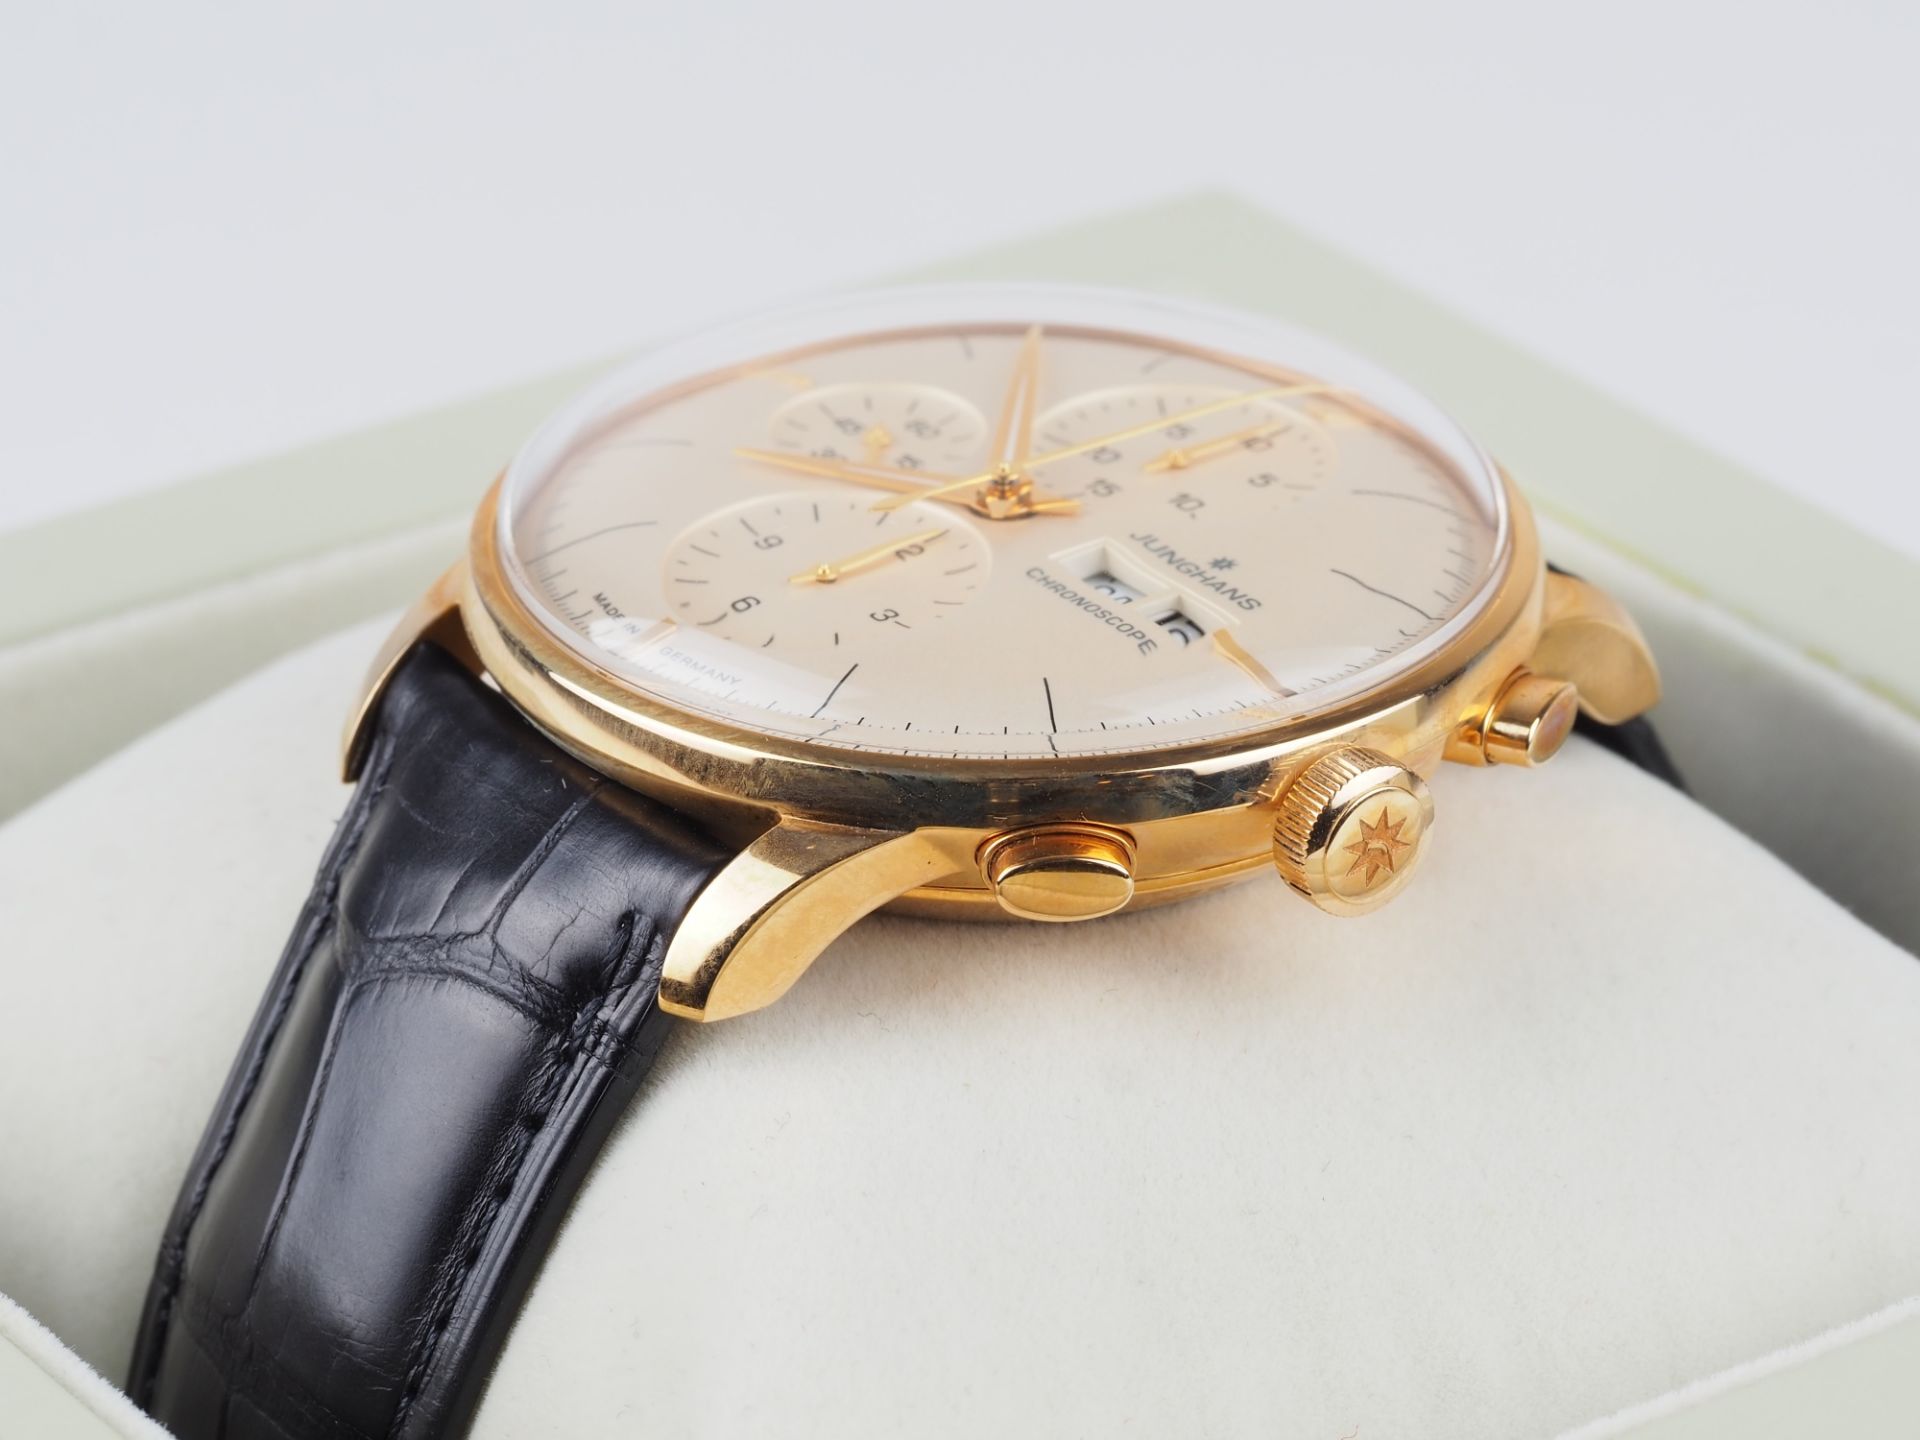 Junghans Meister Chronoscope Gold, Limited Edition 144/151, unworn. - Image 2 of 5